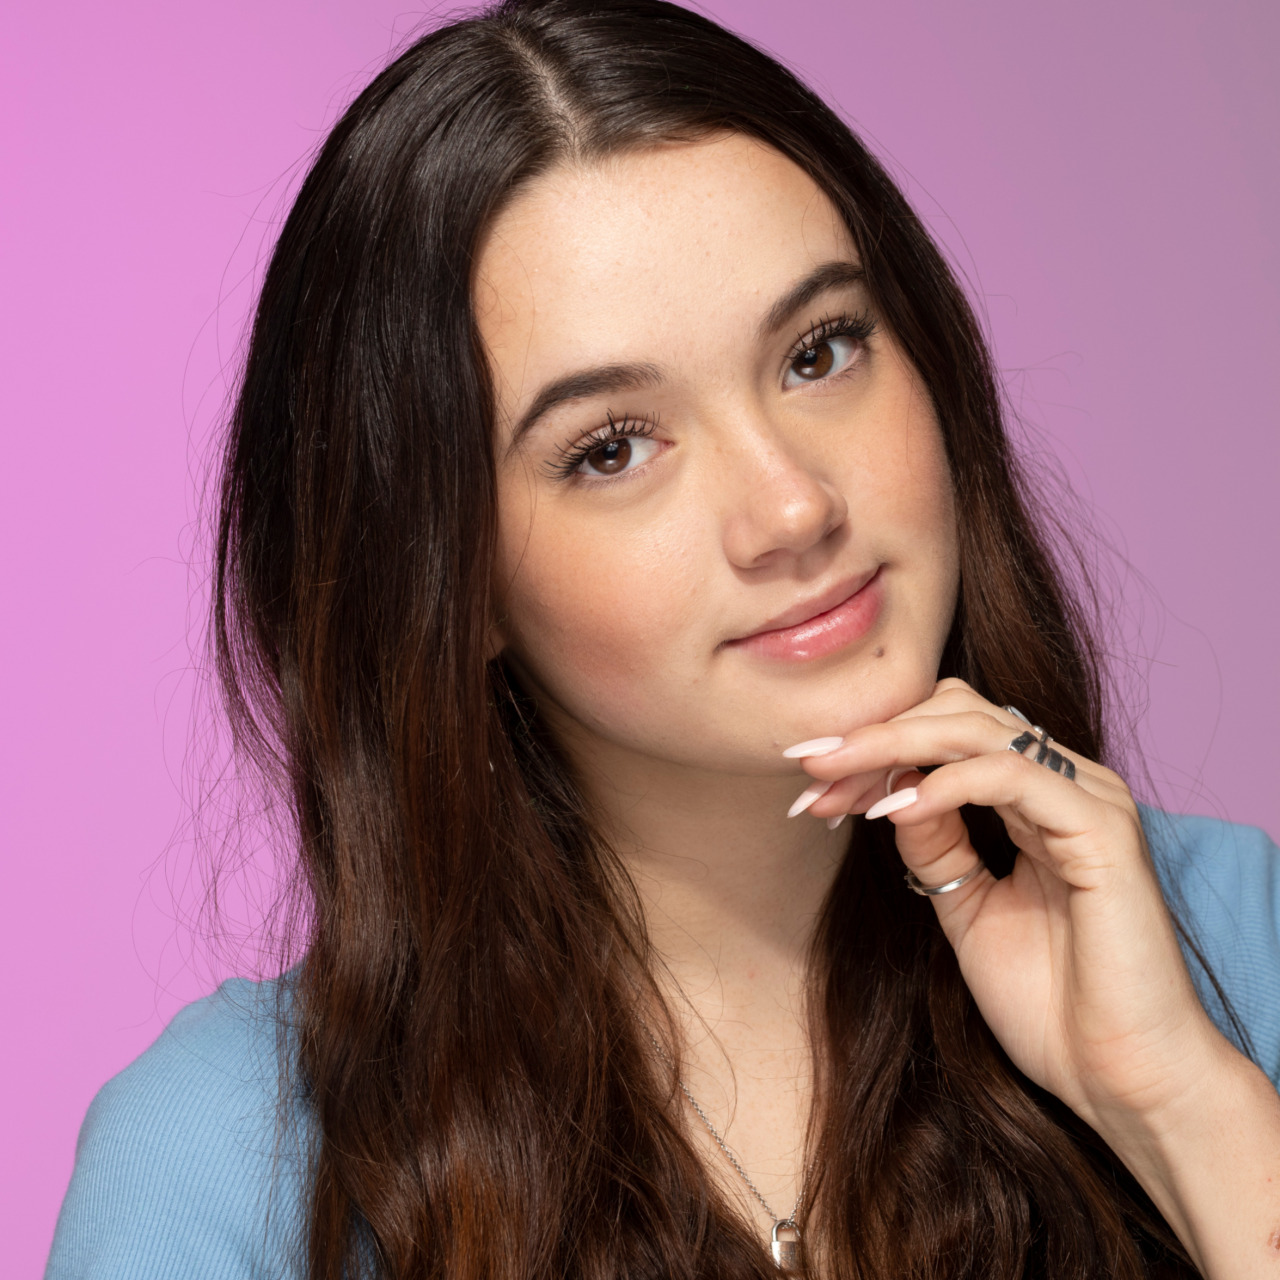 fashion:
“ Fashion Spotlight: Fiona Frills 16-year-old beauty, fashion, and lifestyle influencer and entrepreneur Fiona Frills launched her YouTube channel at the age of 10, and has since amassed over 1 Million followers. At the age of 13, Fiona...